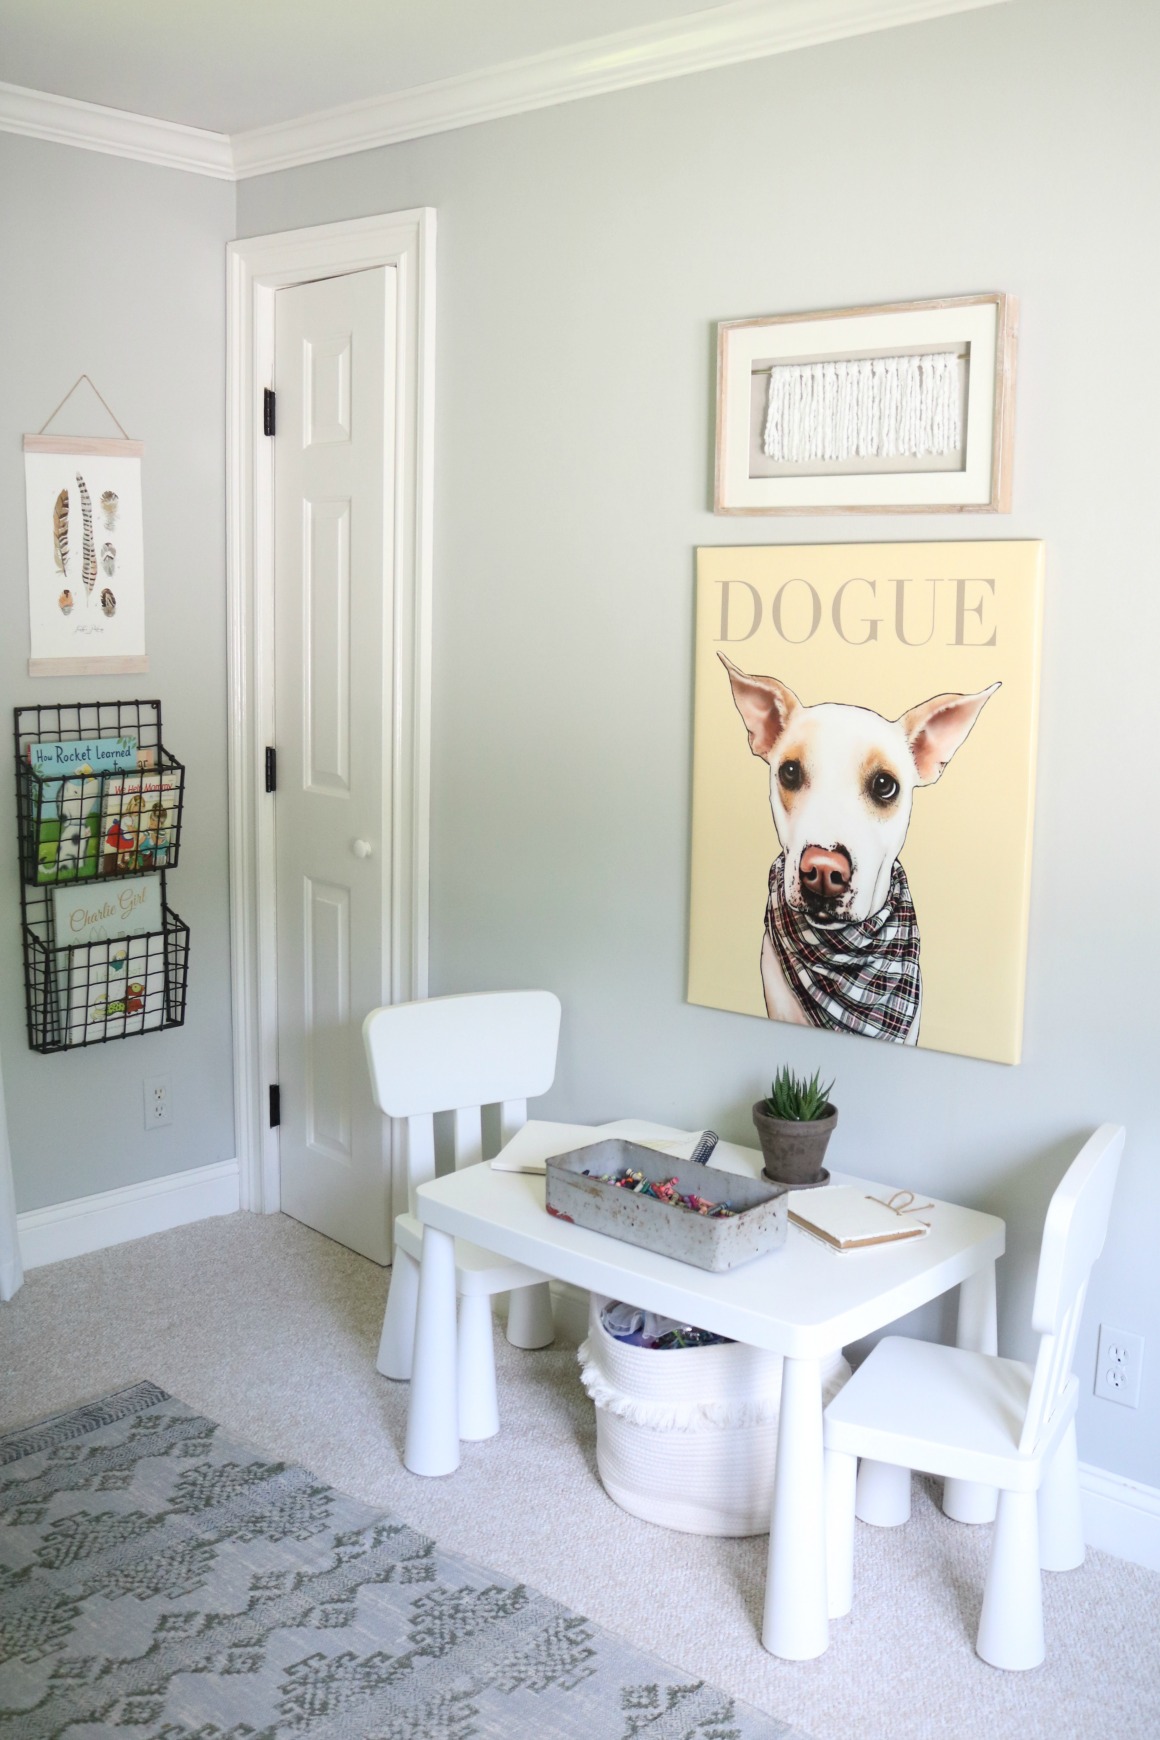 5 of the BEST Tips to Decorate with Thrifted Decor!